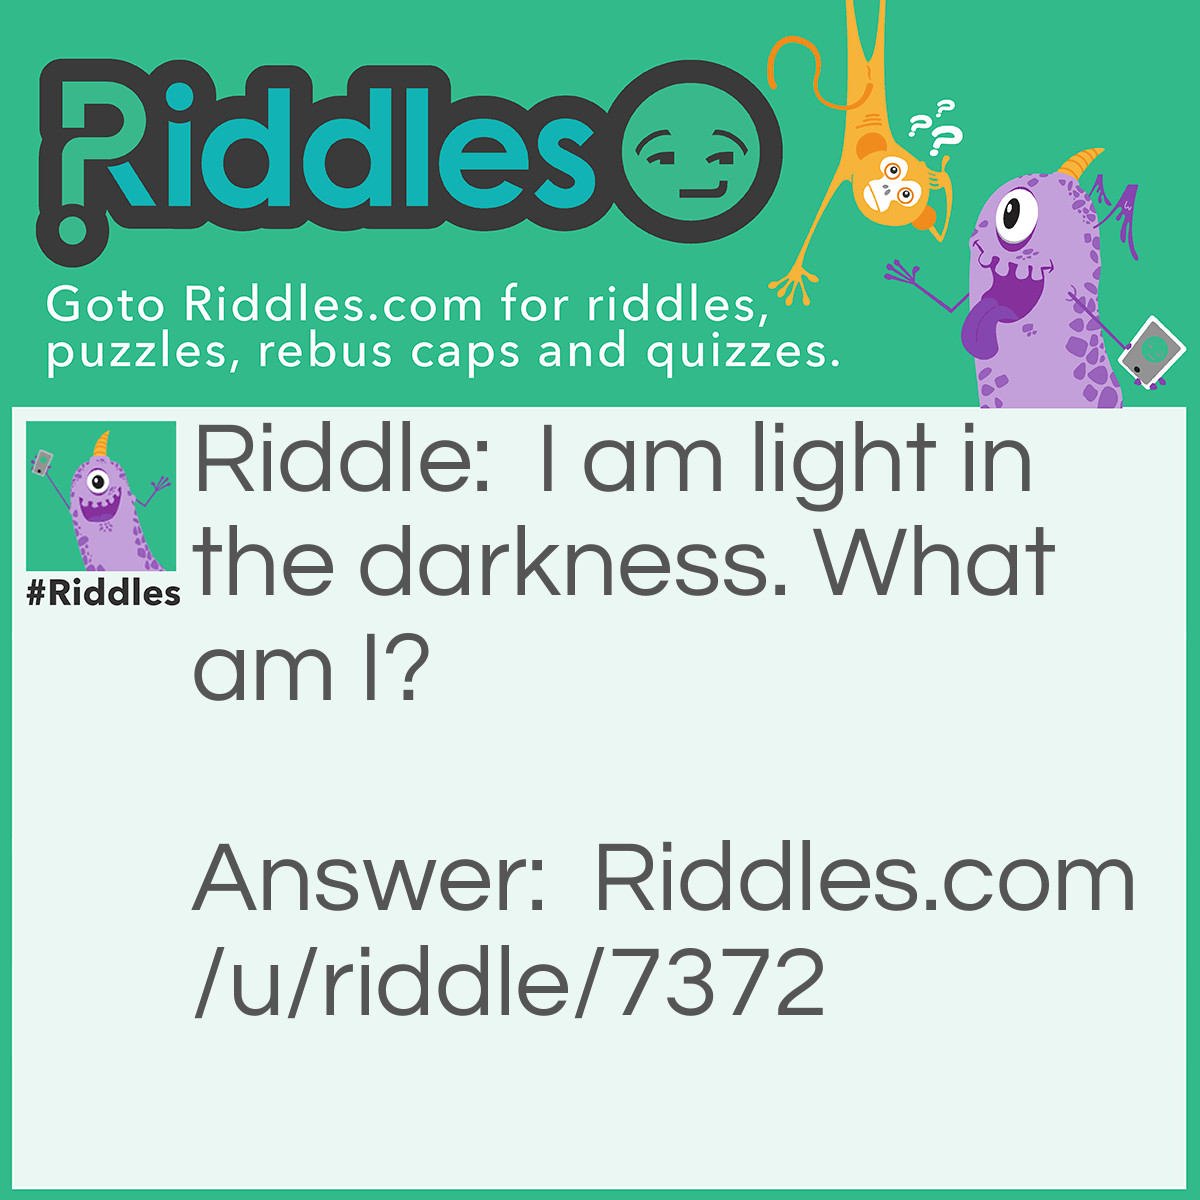 Riddle: I am light in the darkness. What am I? Answer: Flashlight.